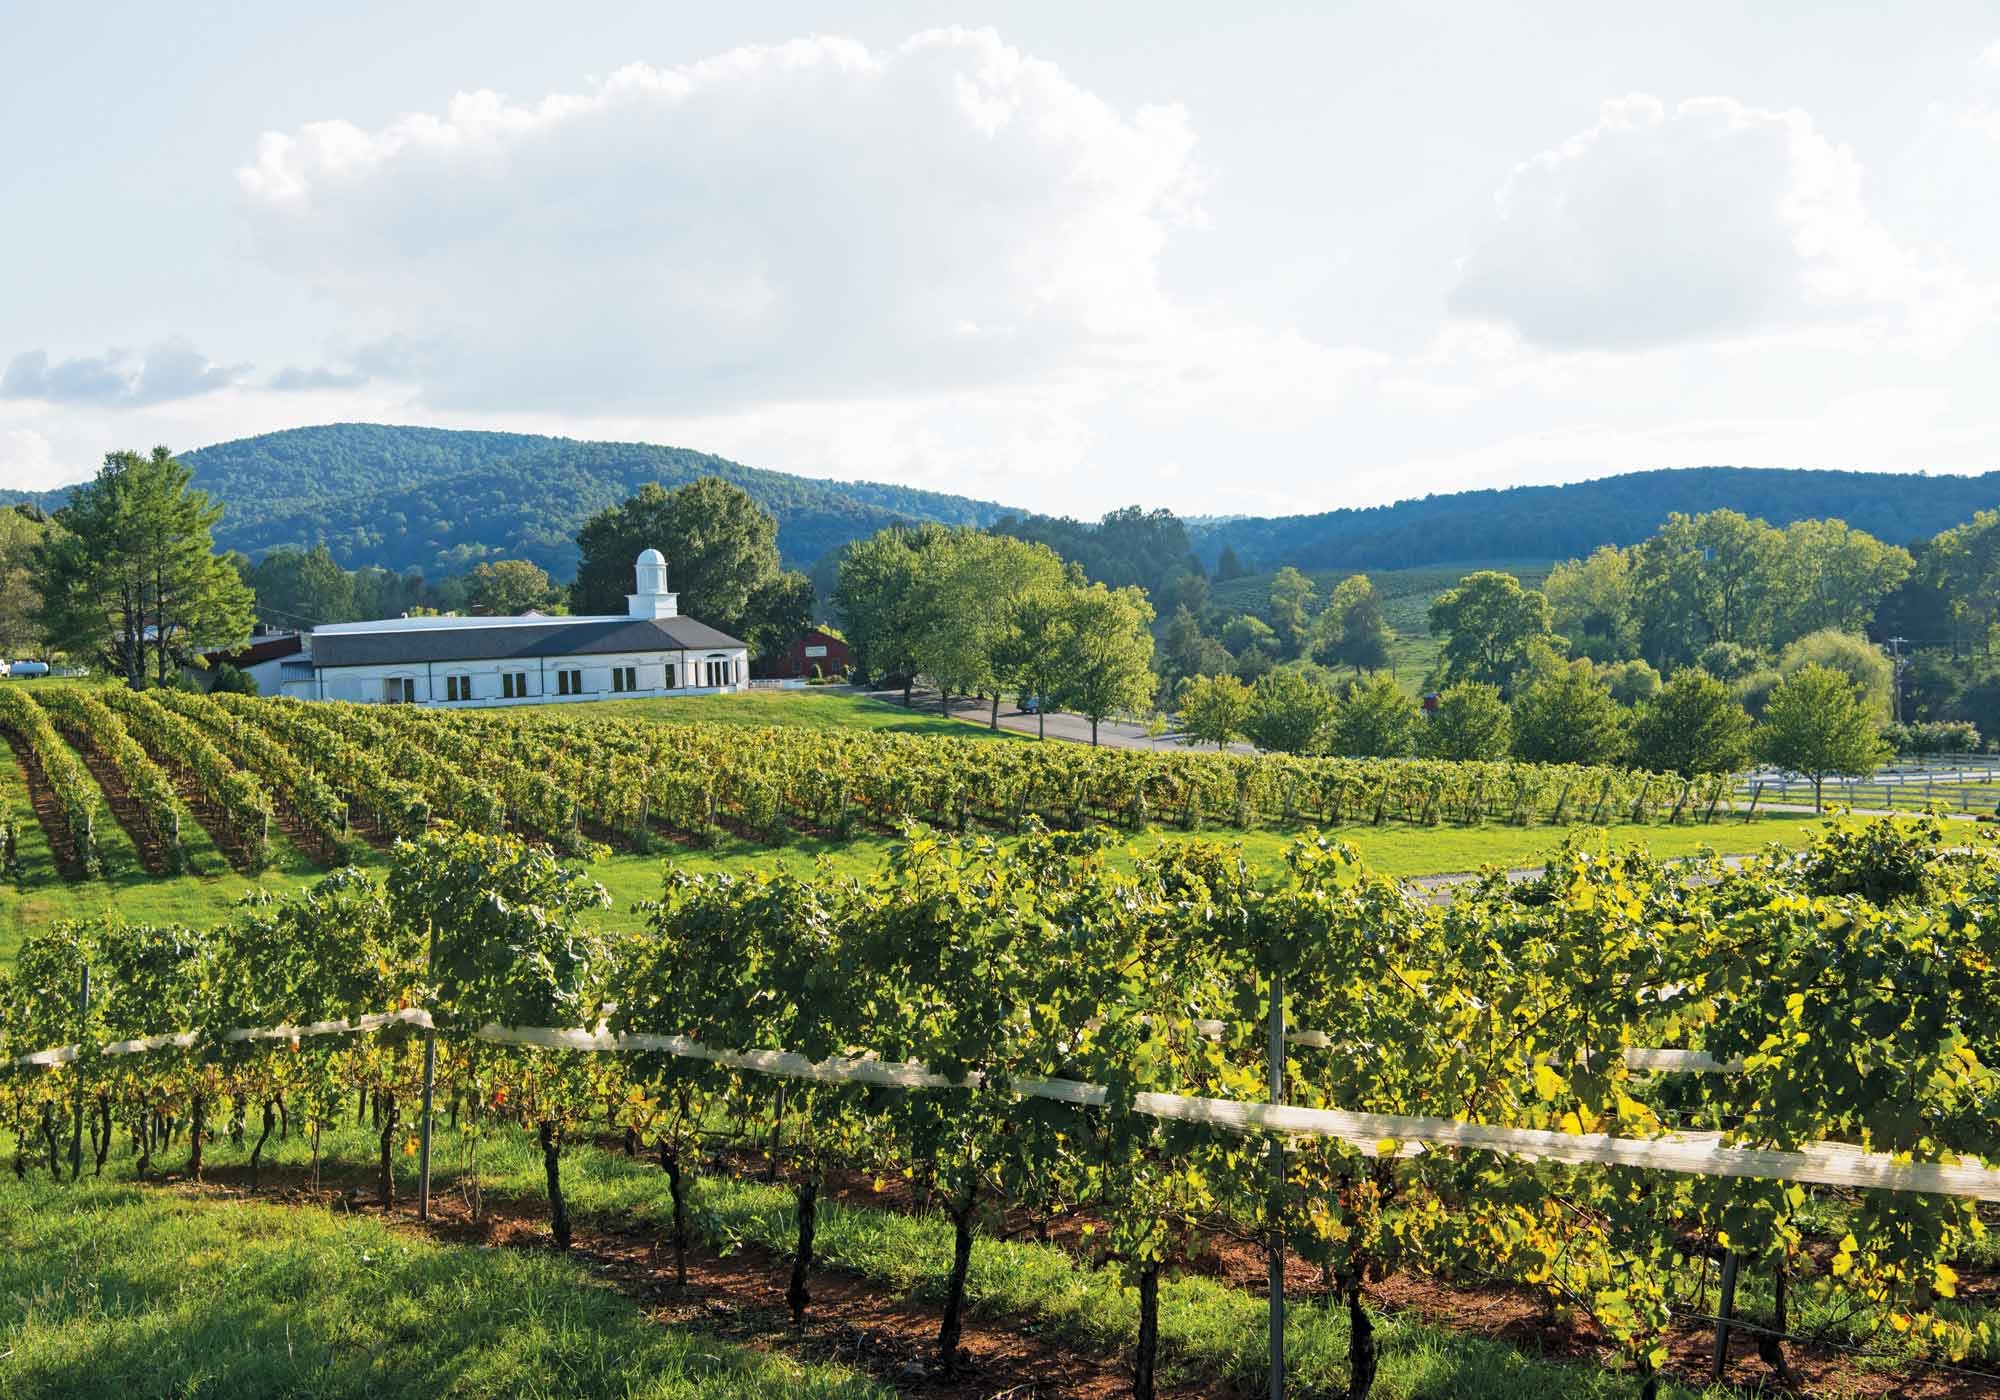 A view of the tasting room and mountains at Barboursville Vineyards with the Blue Ridge Mountains.